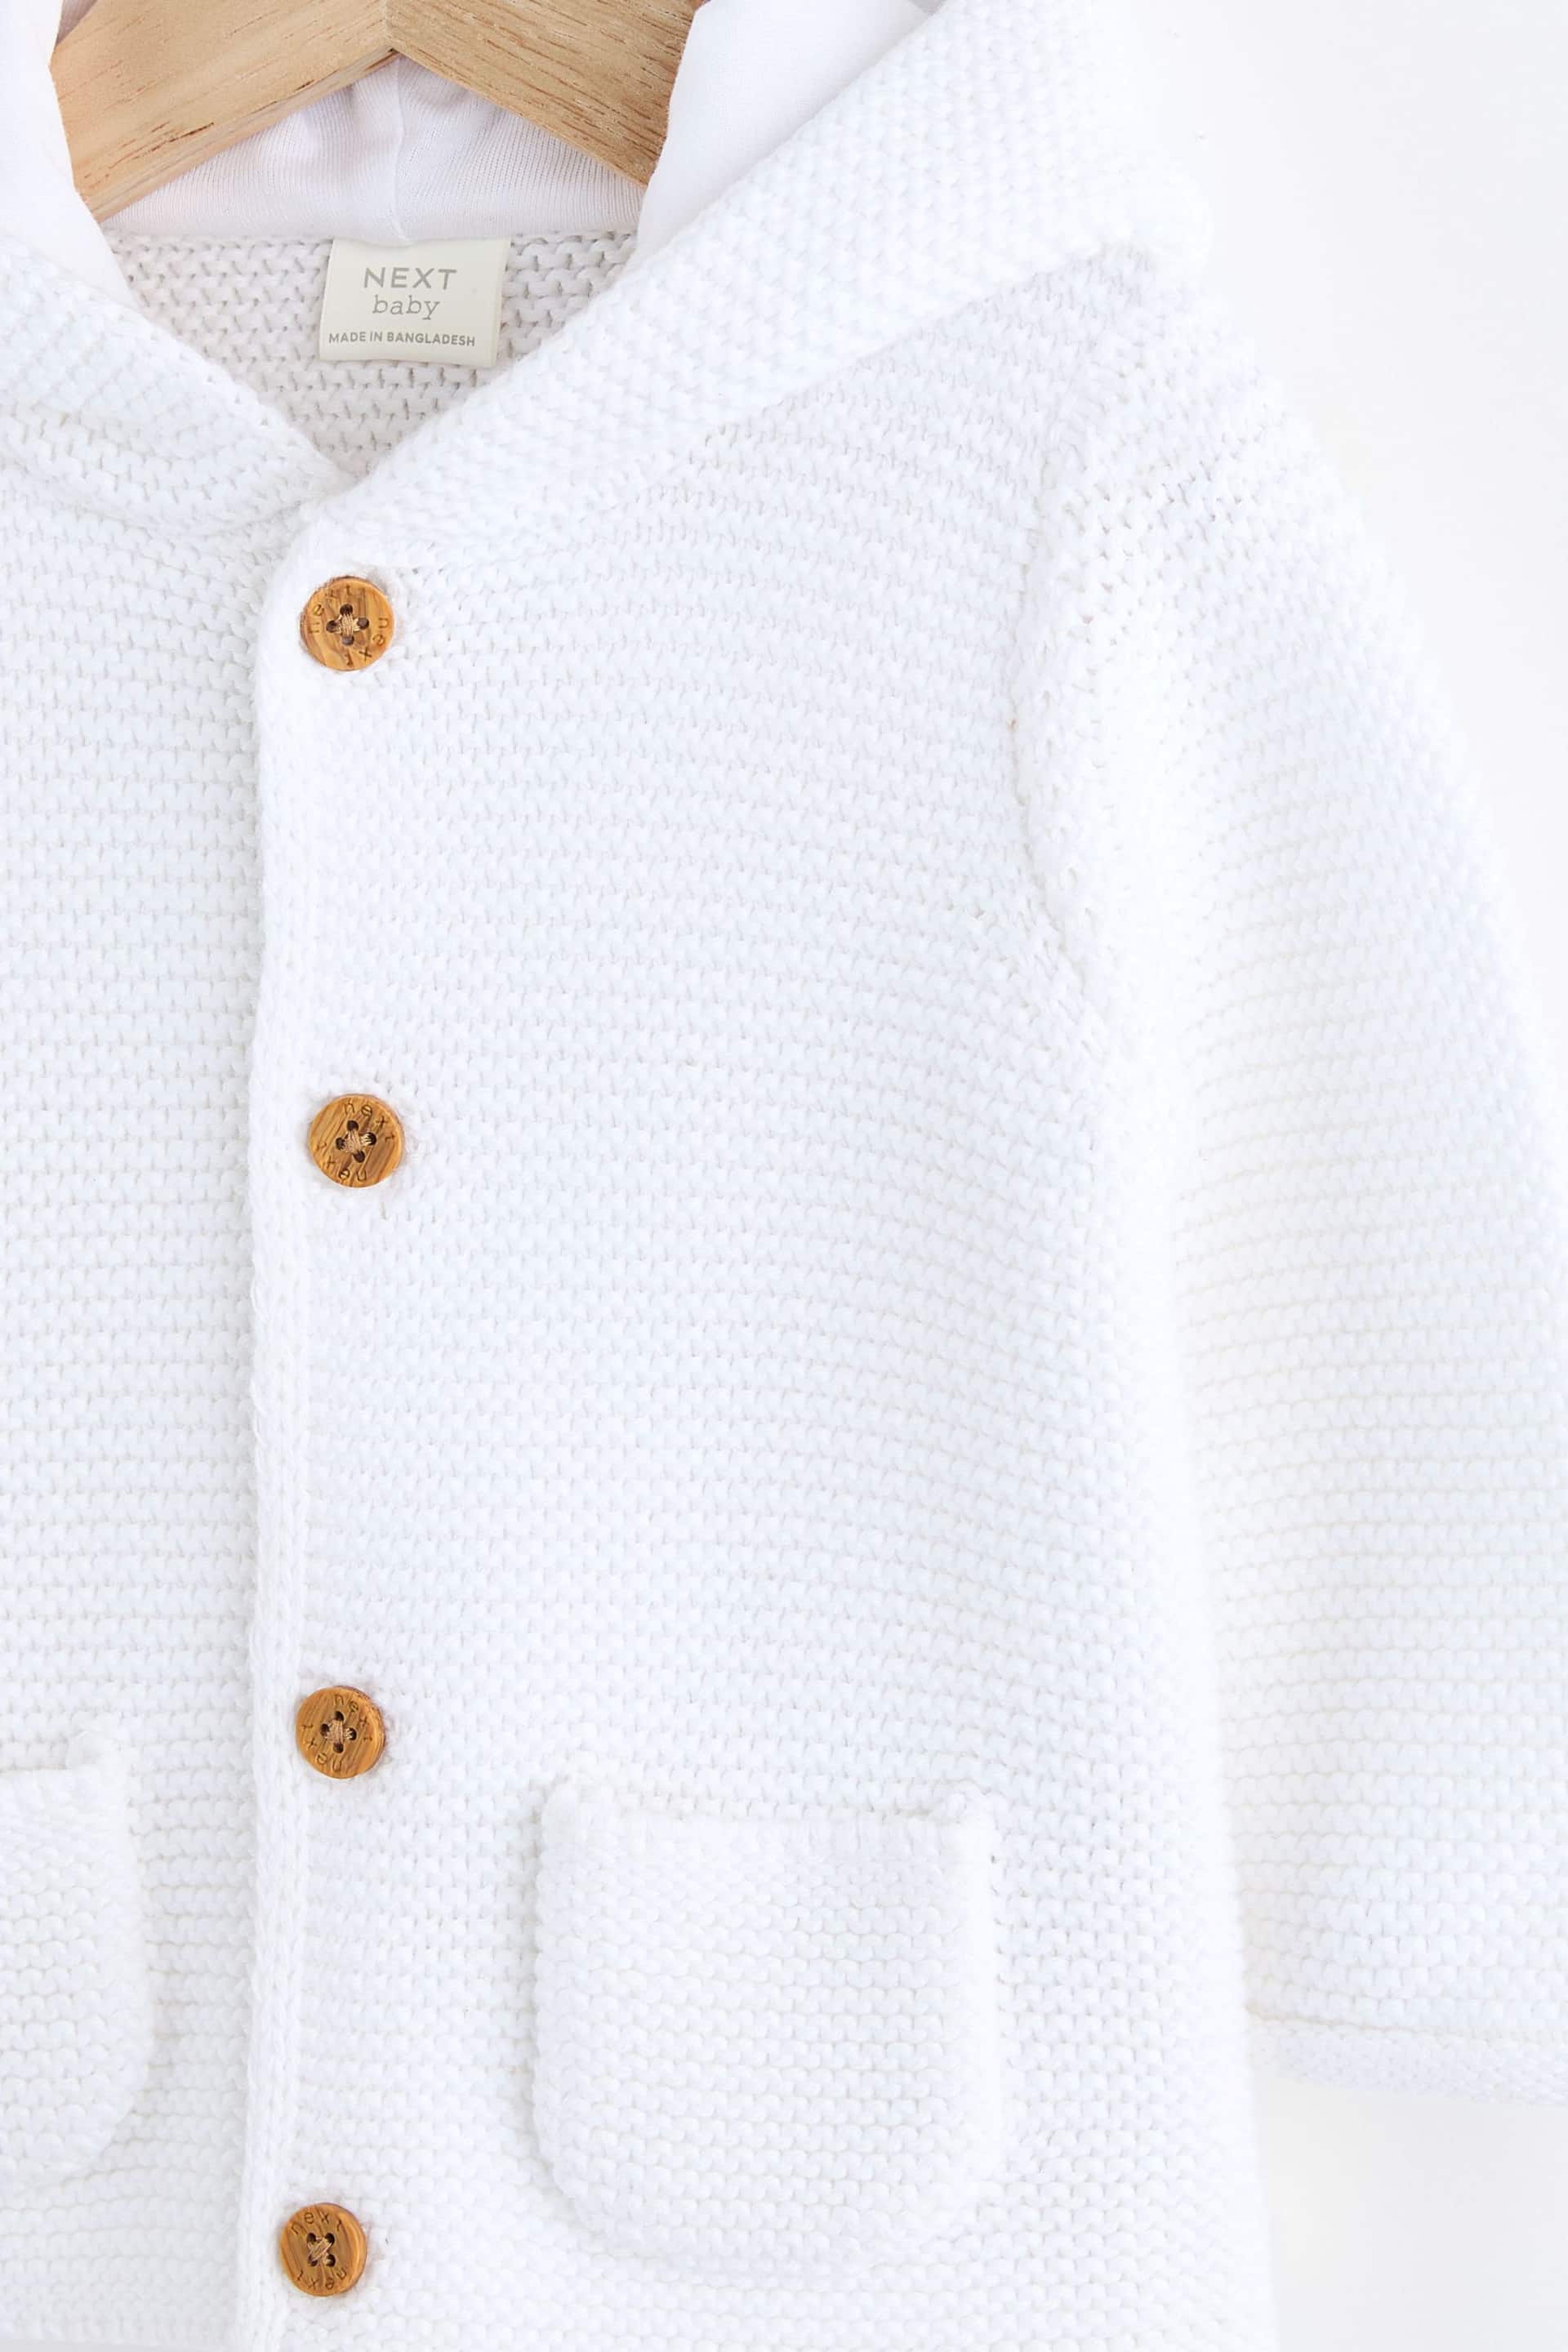 White Knitted Baby Cardigan - Image 3 of 5